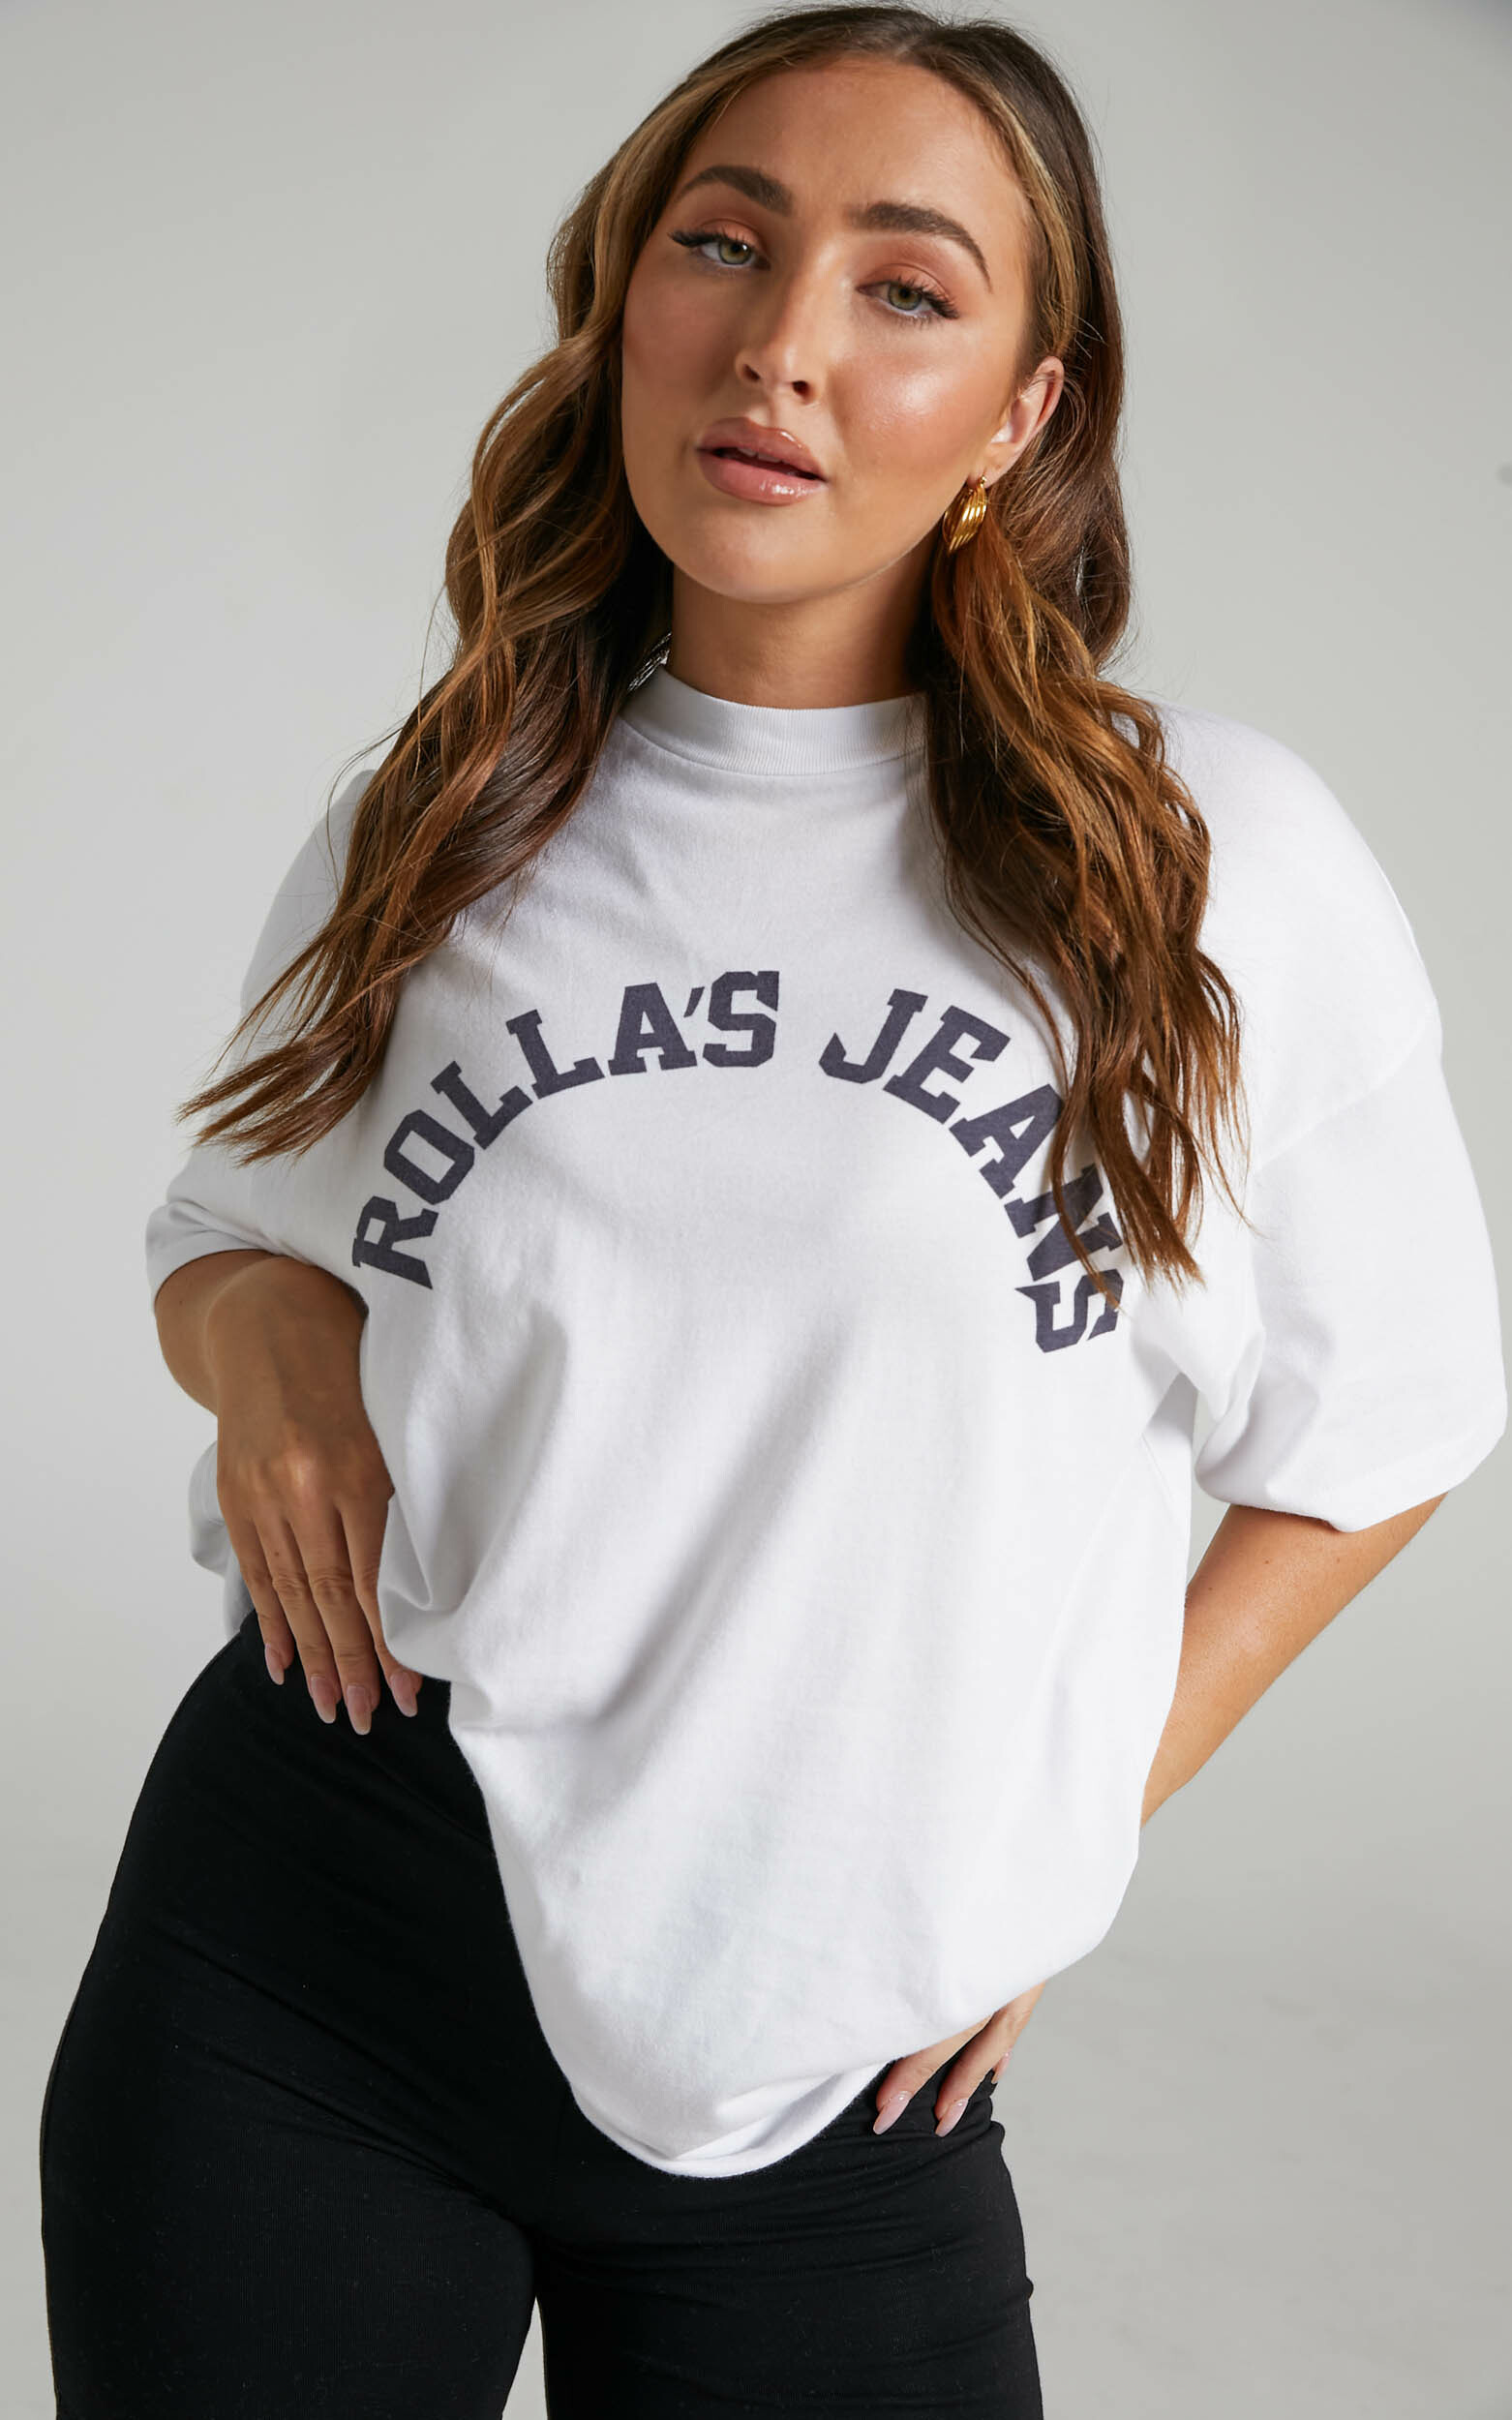 Rolla's - VARSITY SUPER SLOUCH TEE in White - 06, WHT1, hi-res image number null